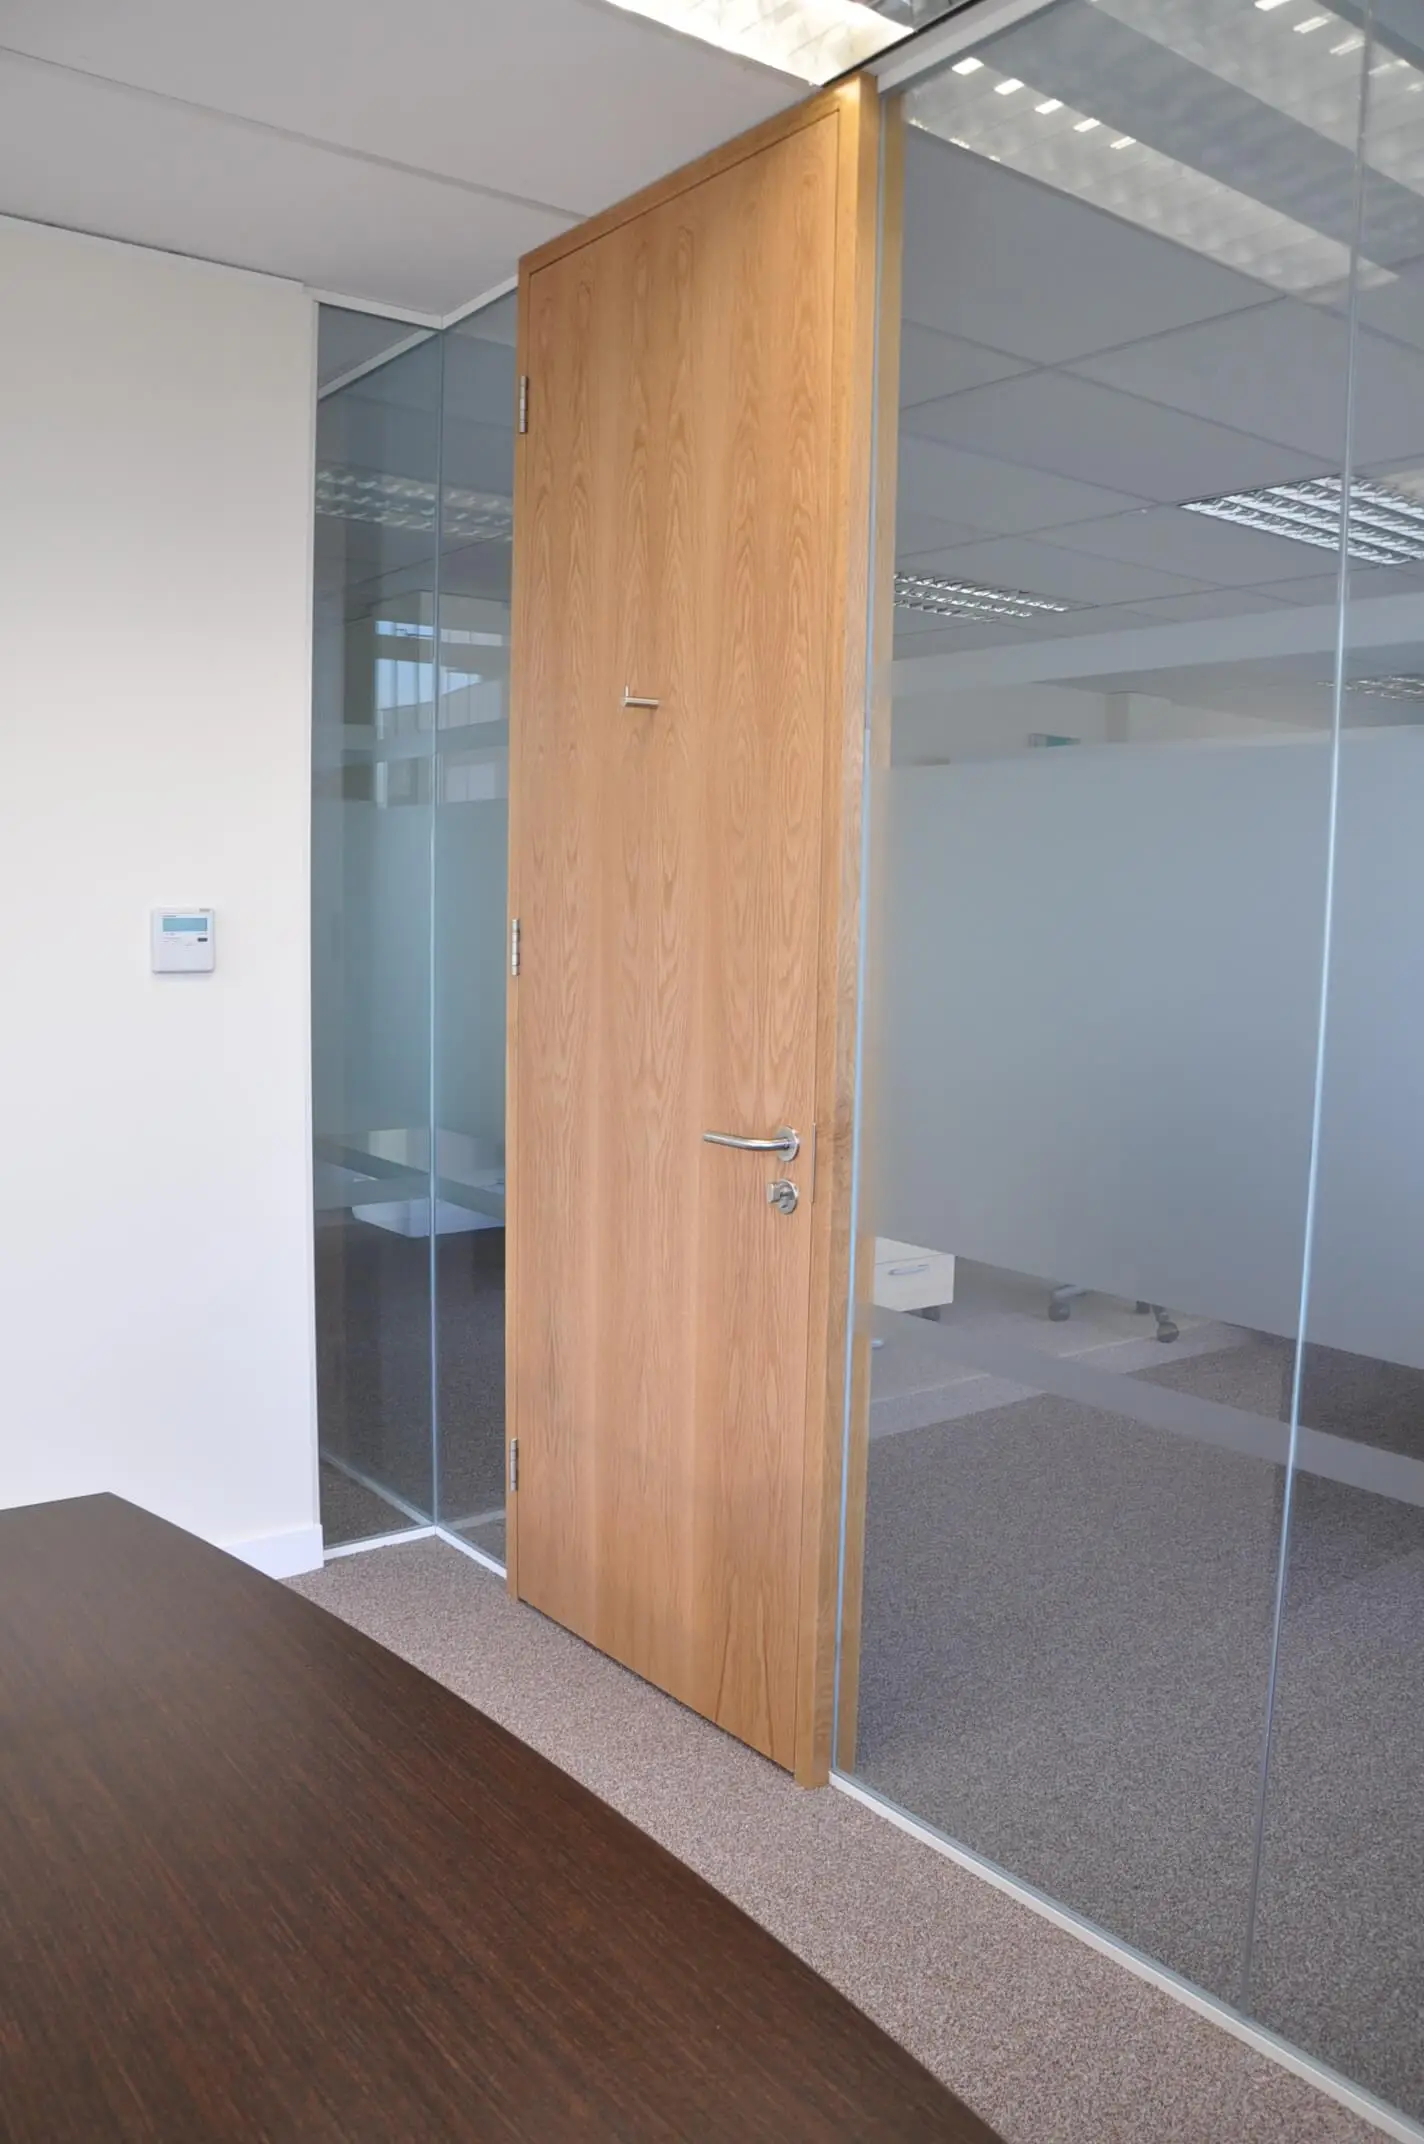 Full height solid doors with glass partitions